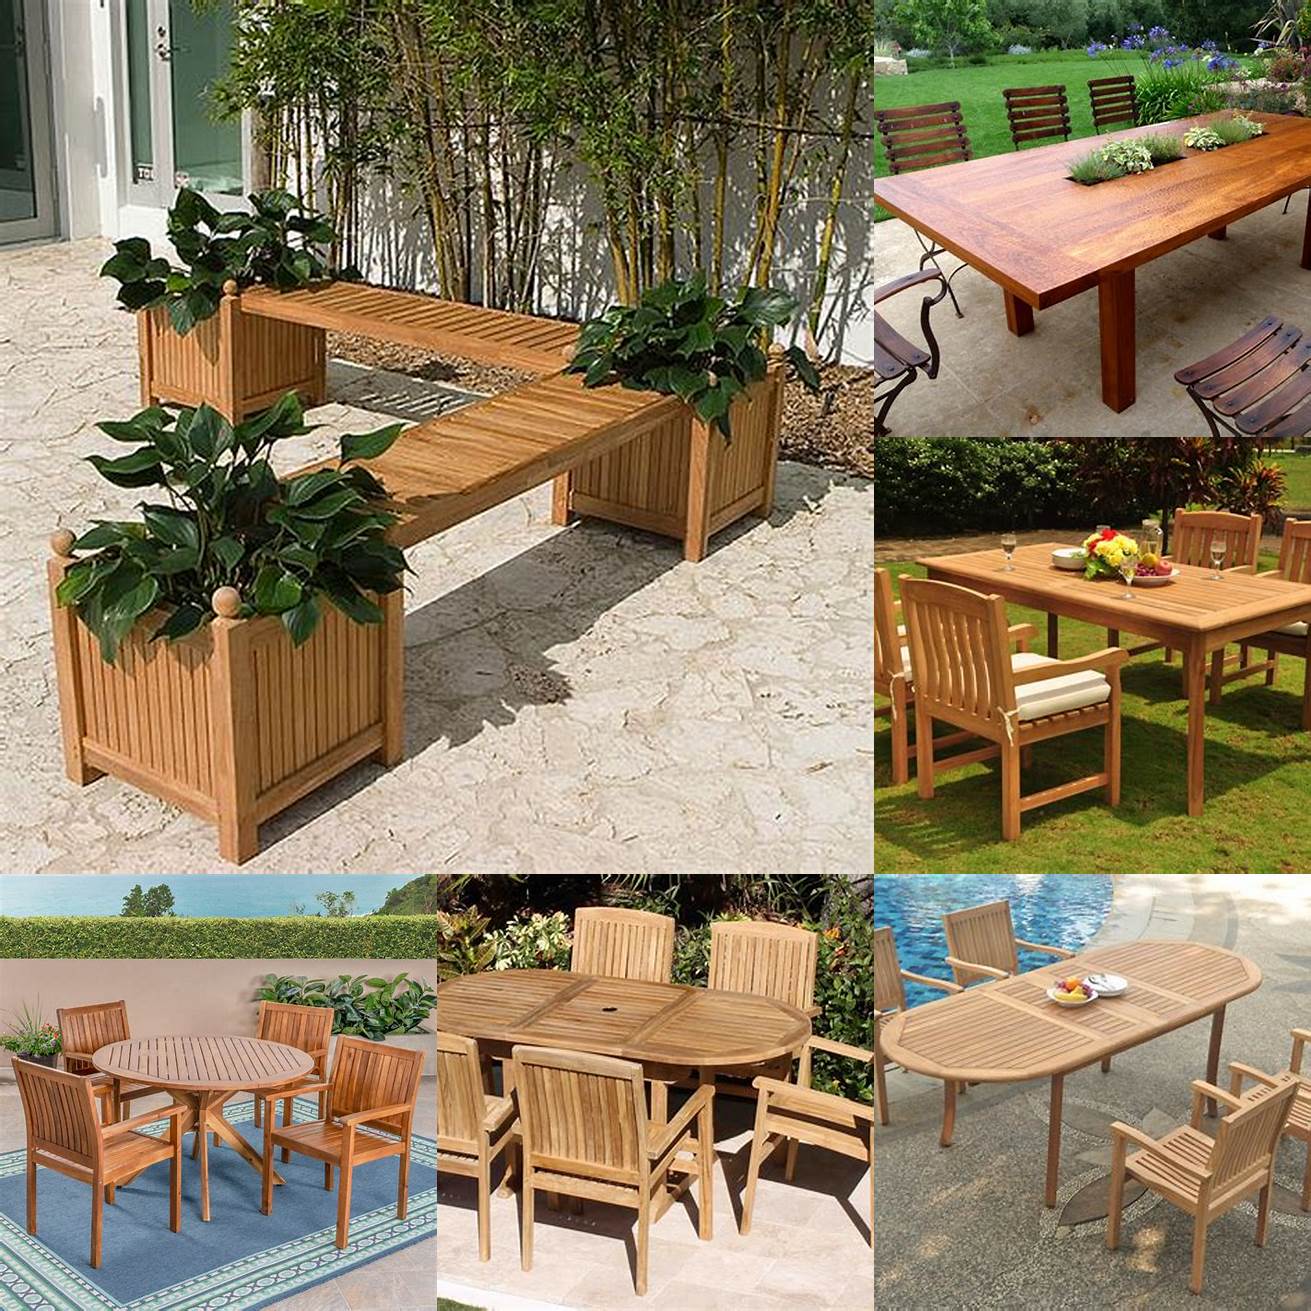 Teak Wood Patio Table with Planters